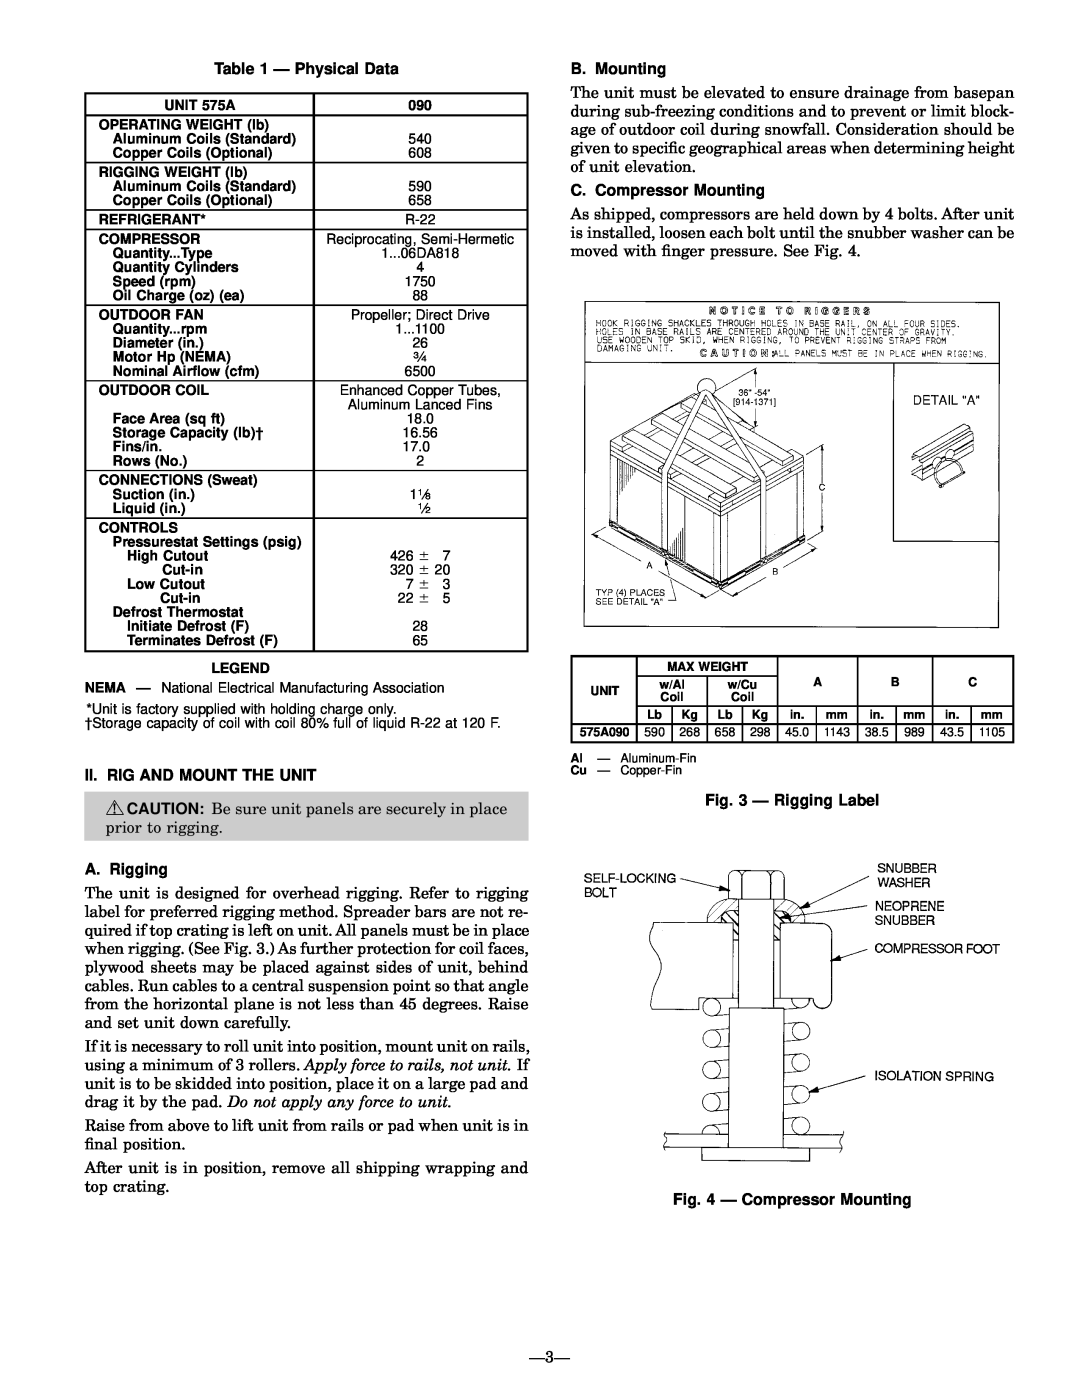 Bryant 575A Ð Physical Data, Ii.Rig And Mount The Unit, A.Rigging, B. Mounting, C. Compressor Mounting, Ð Rigging Label 